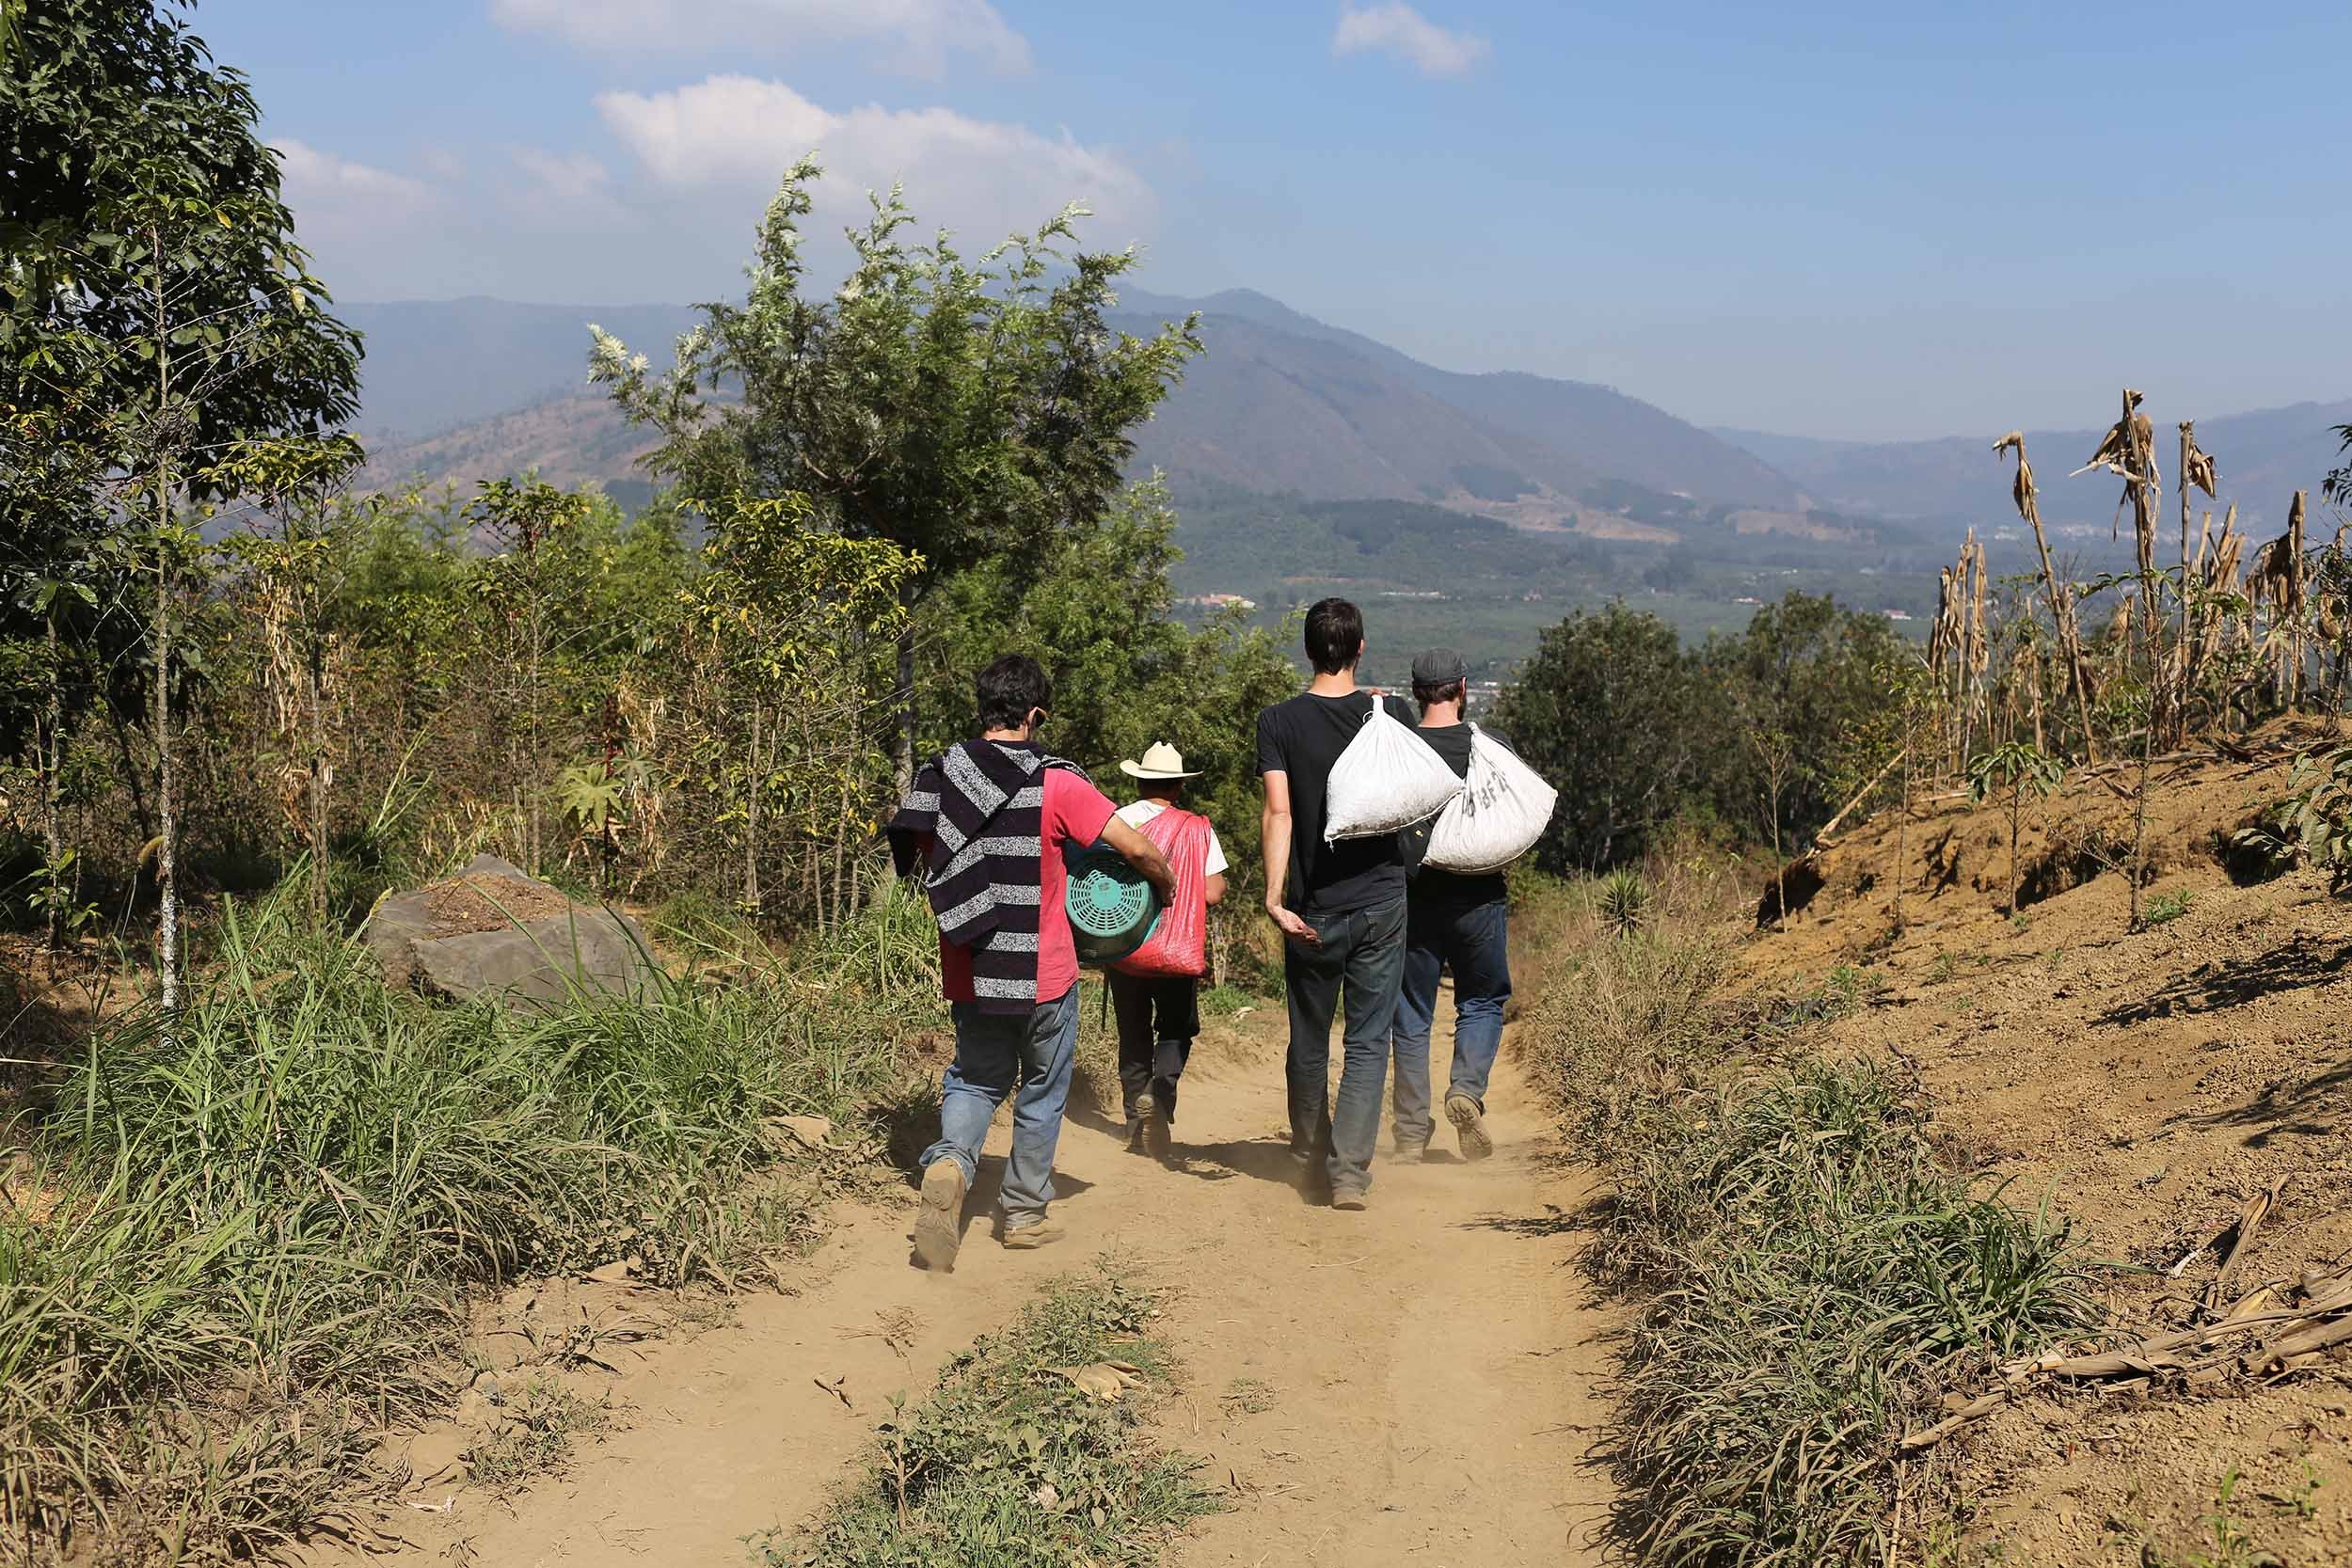  Workers walk back from a farm after picking in San Miguel Escobar, Guatemala. 